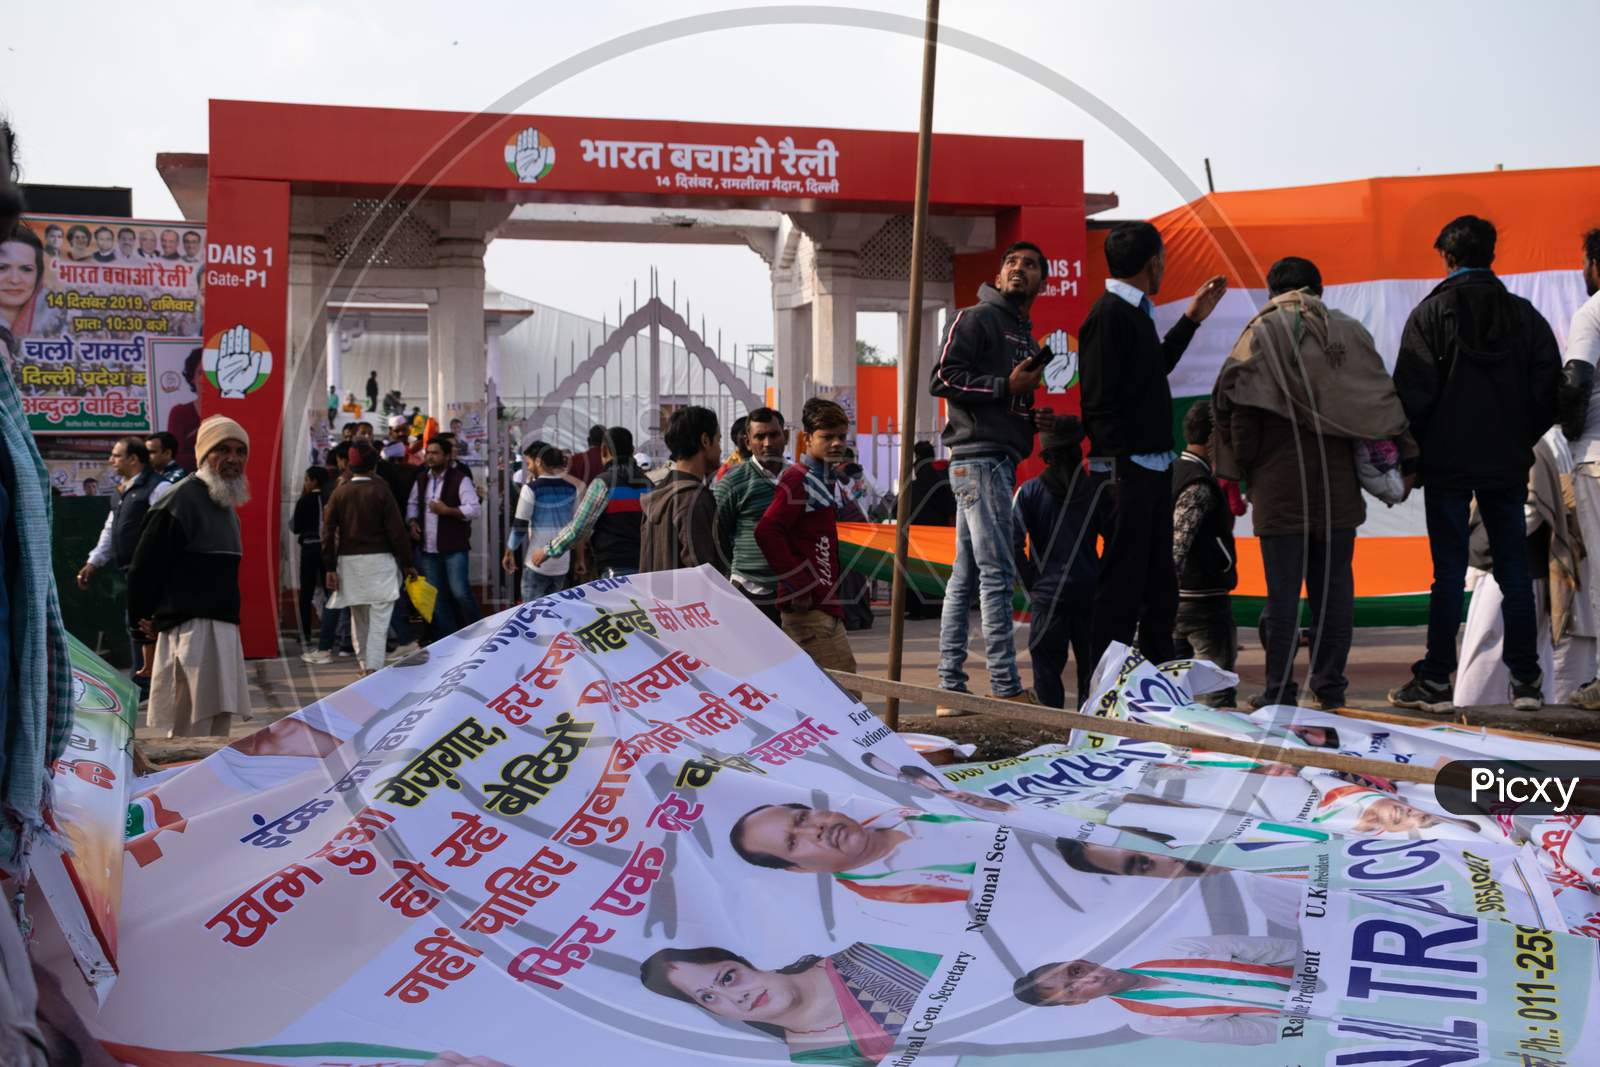 Posters and banners during 'Bharat Bachao' rally by Congress in Delhi to highlight Modi govt failures